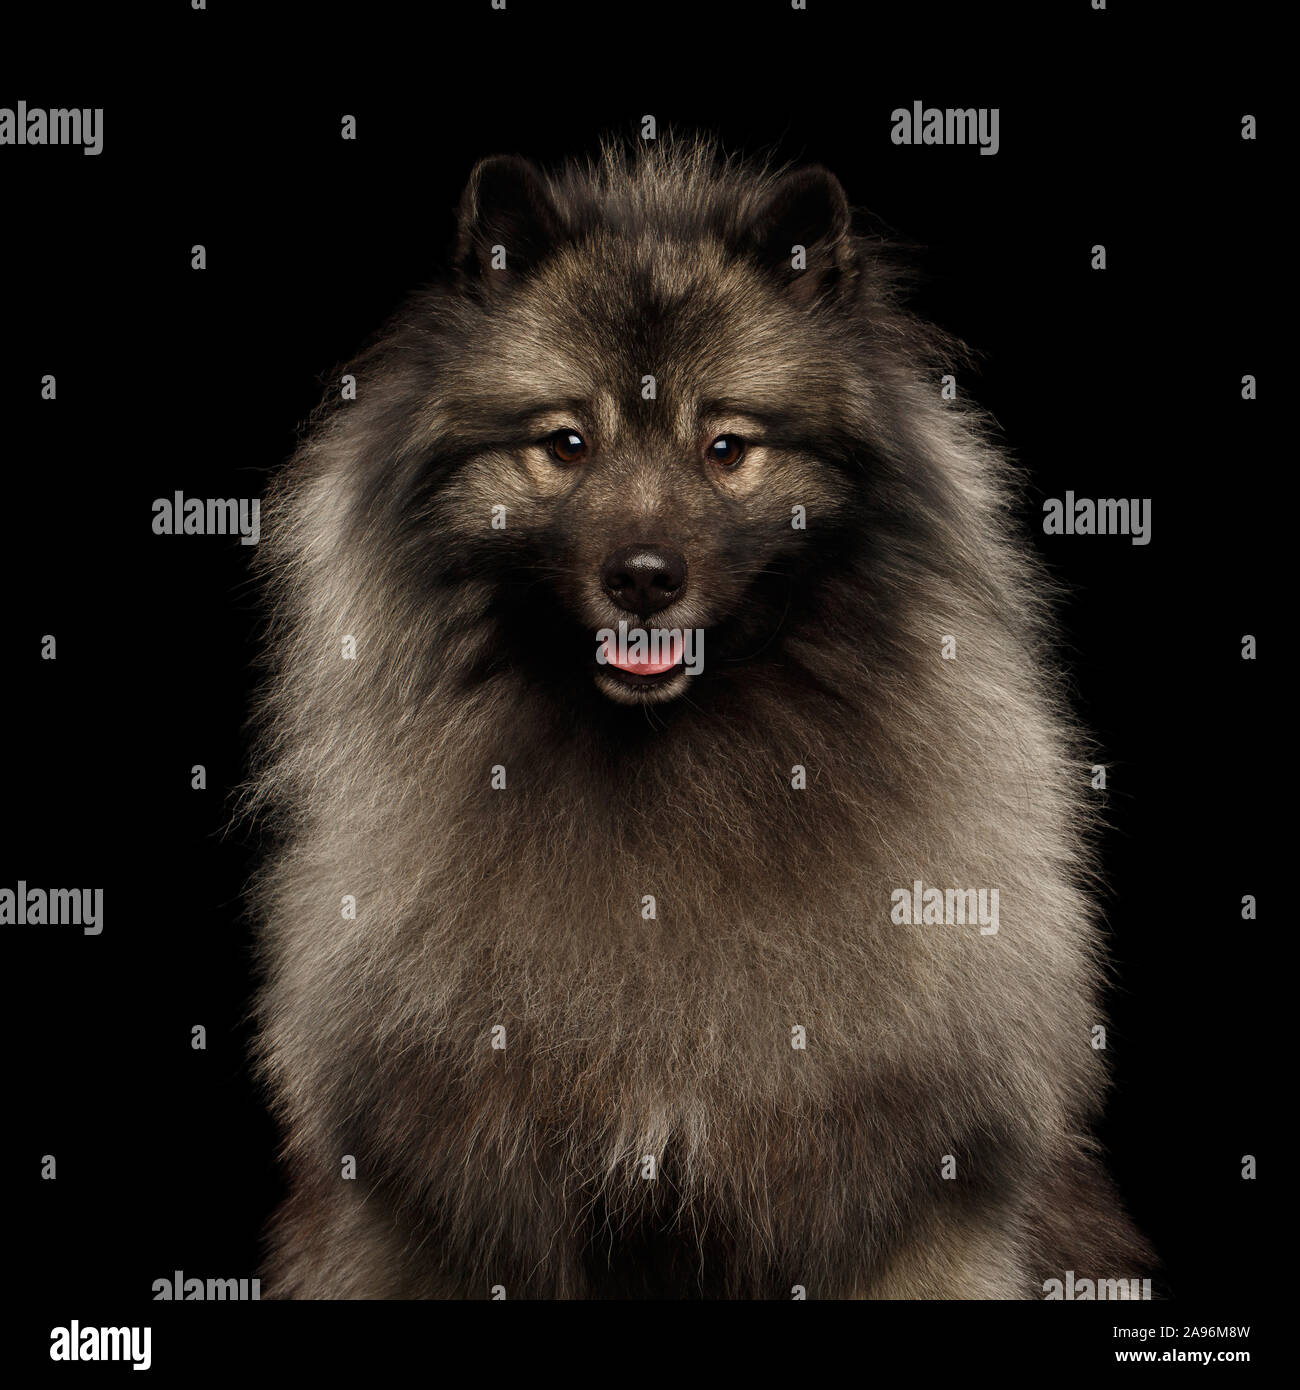 Portrait Of Furry Keeshond Dog Looking In Camera On Isolated Black Background Stock Photo Alamy